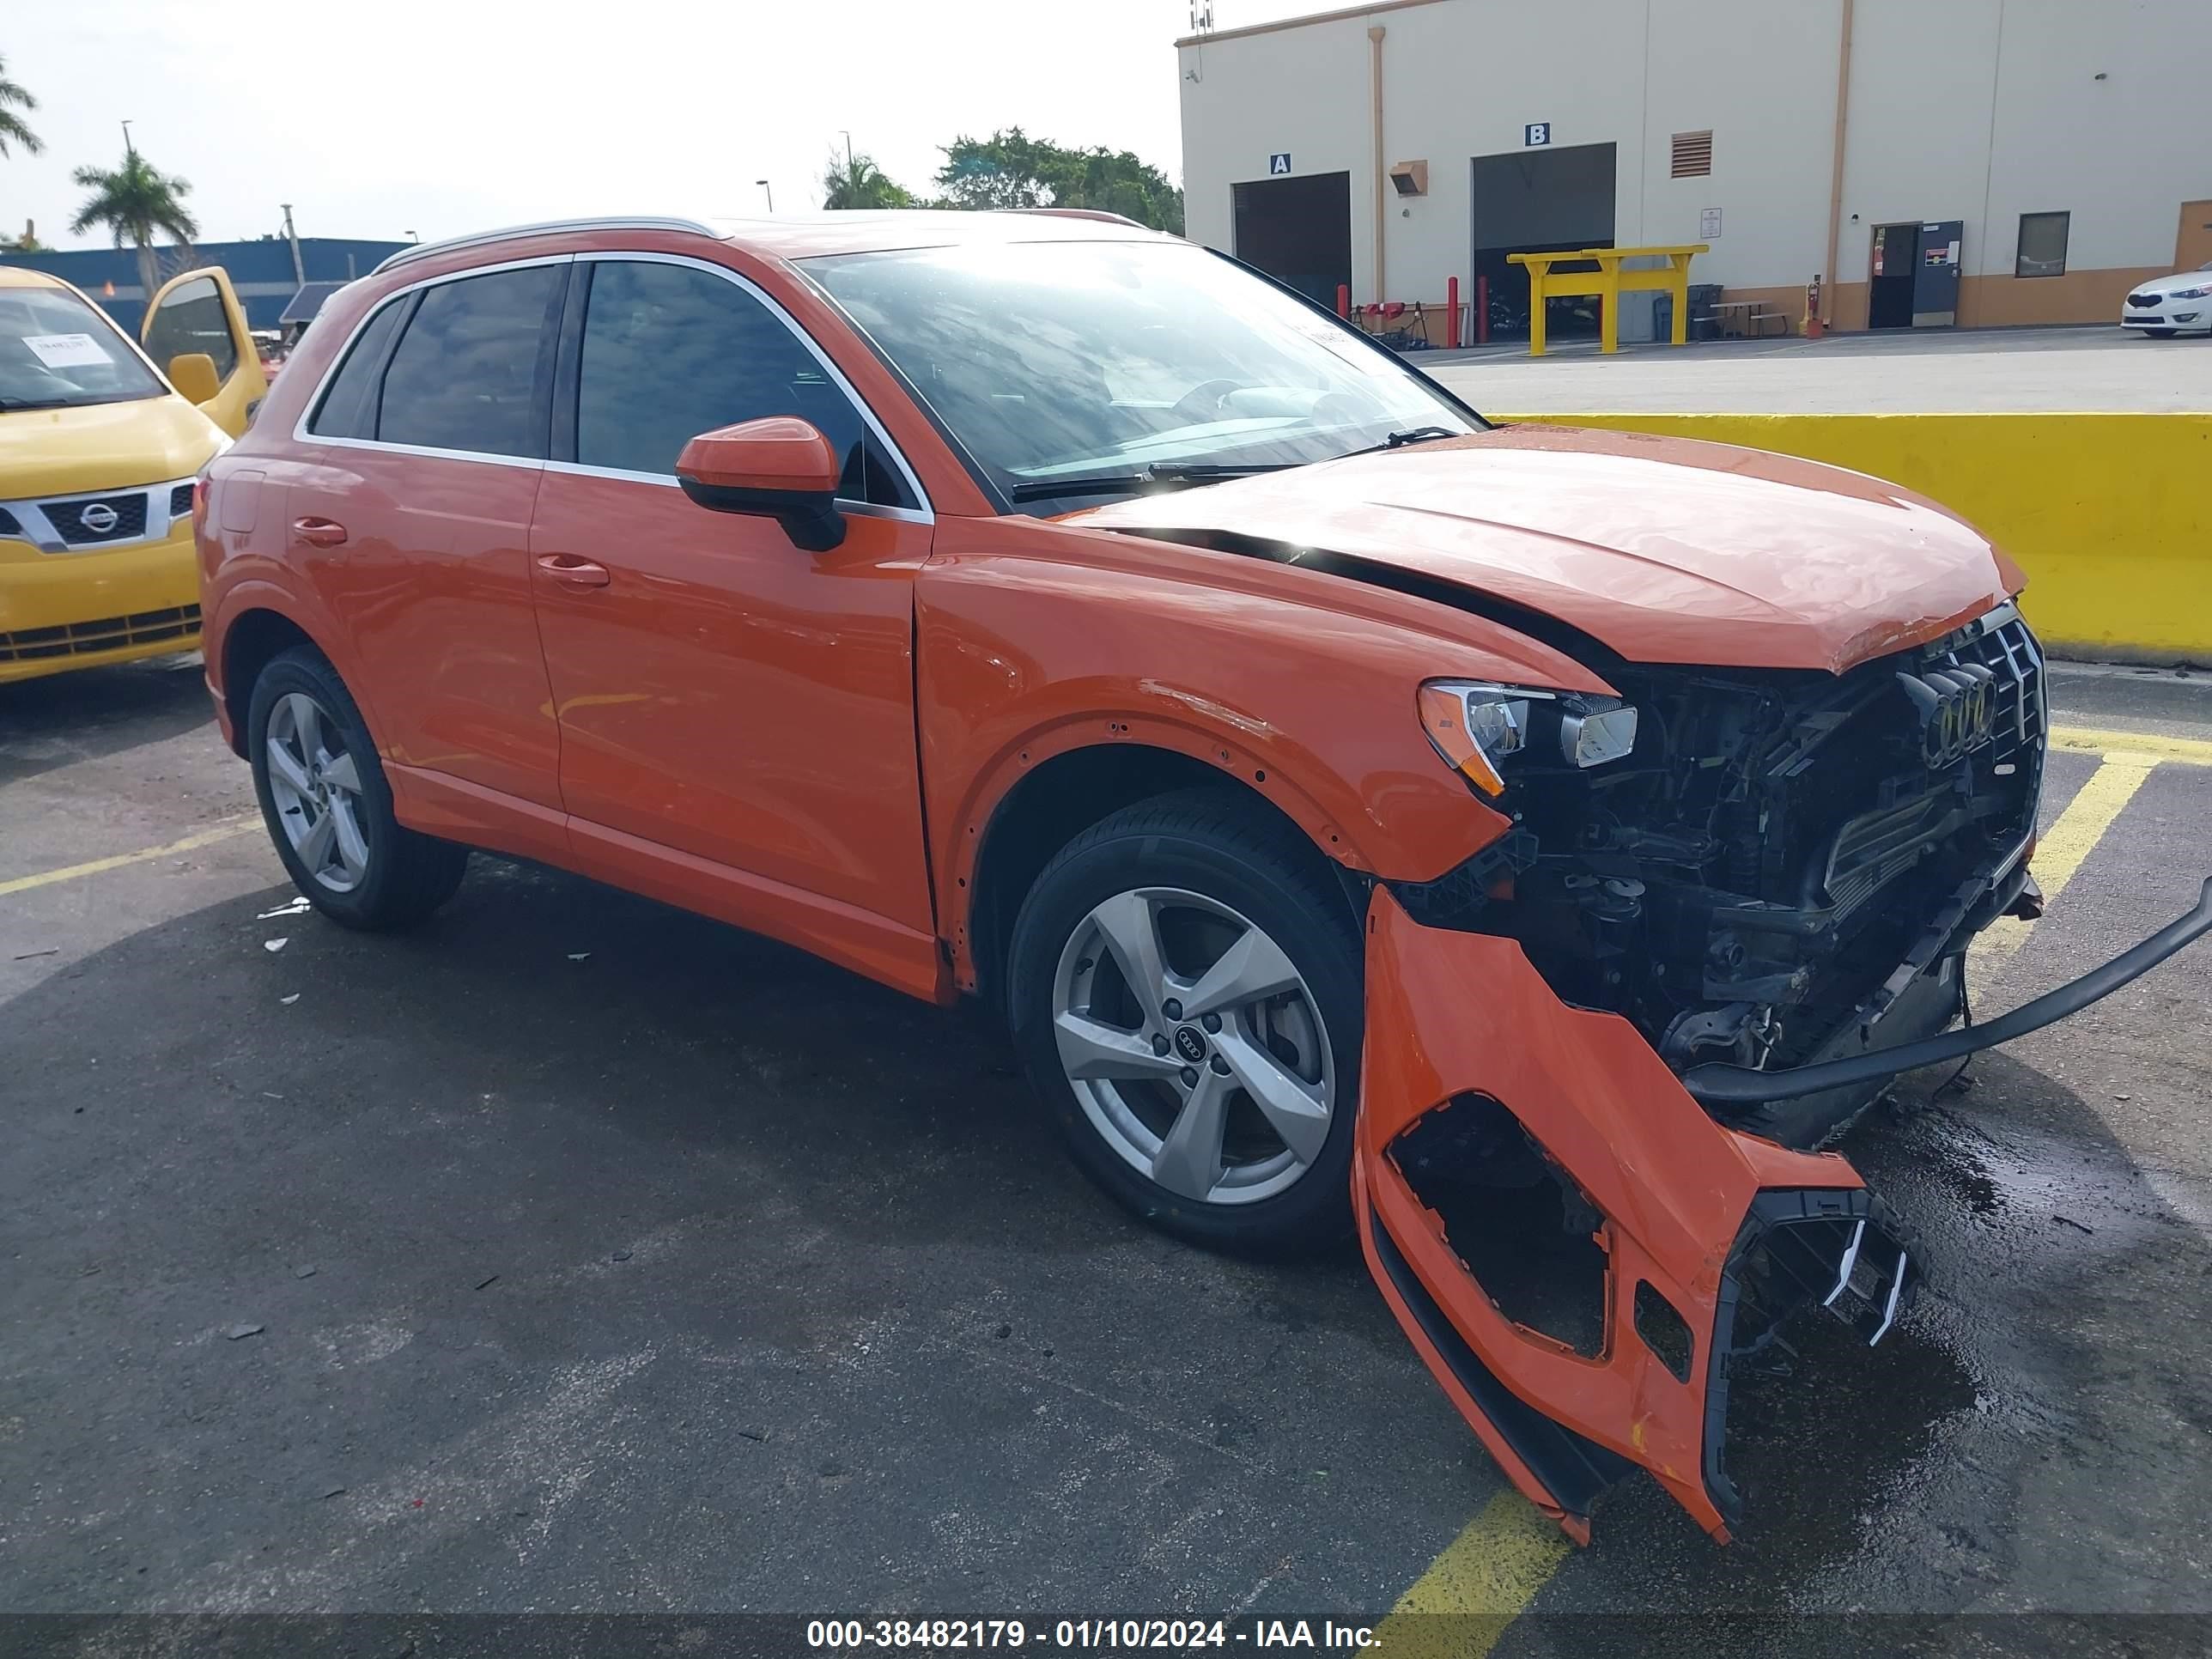 vin: WA1AUCF36M1060404 WA1AUCF36M1060404 2021 audi q3 2000 for Sale in 33332, 20499 Stirling Road, Southwest Ranch, USA